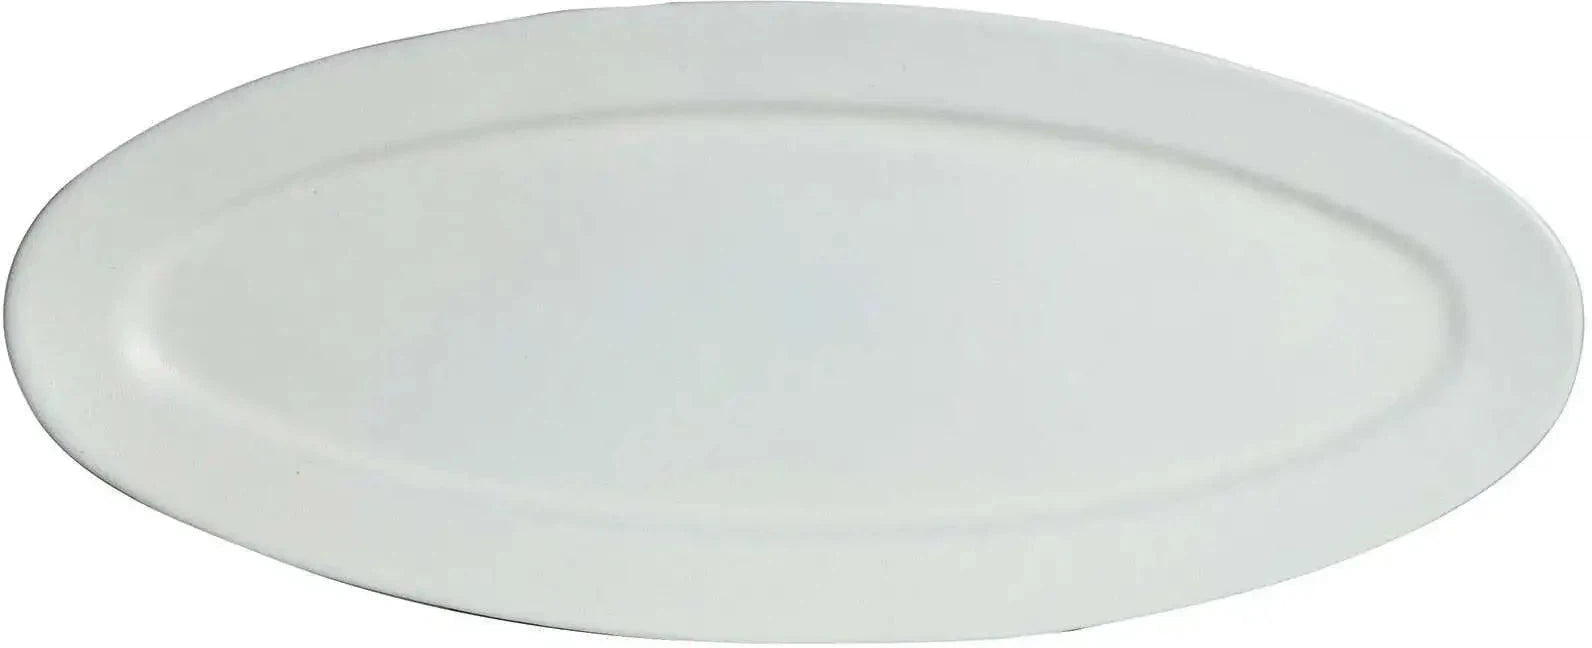 Bugambilia - Mod 51.2 Oz White Oval Double Fish Oval Platter With Glossy Smooth Finish - PO014-MOD-WW